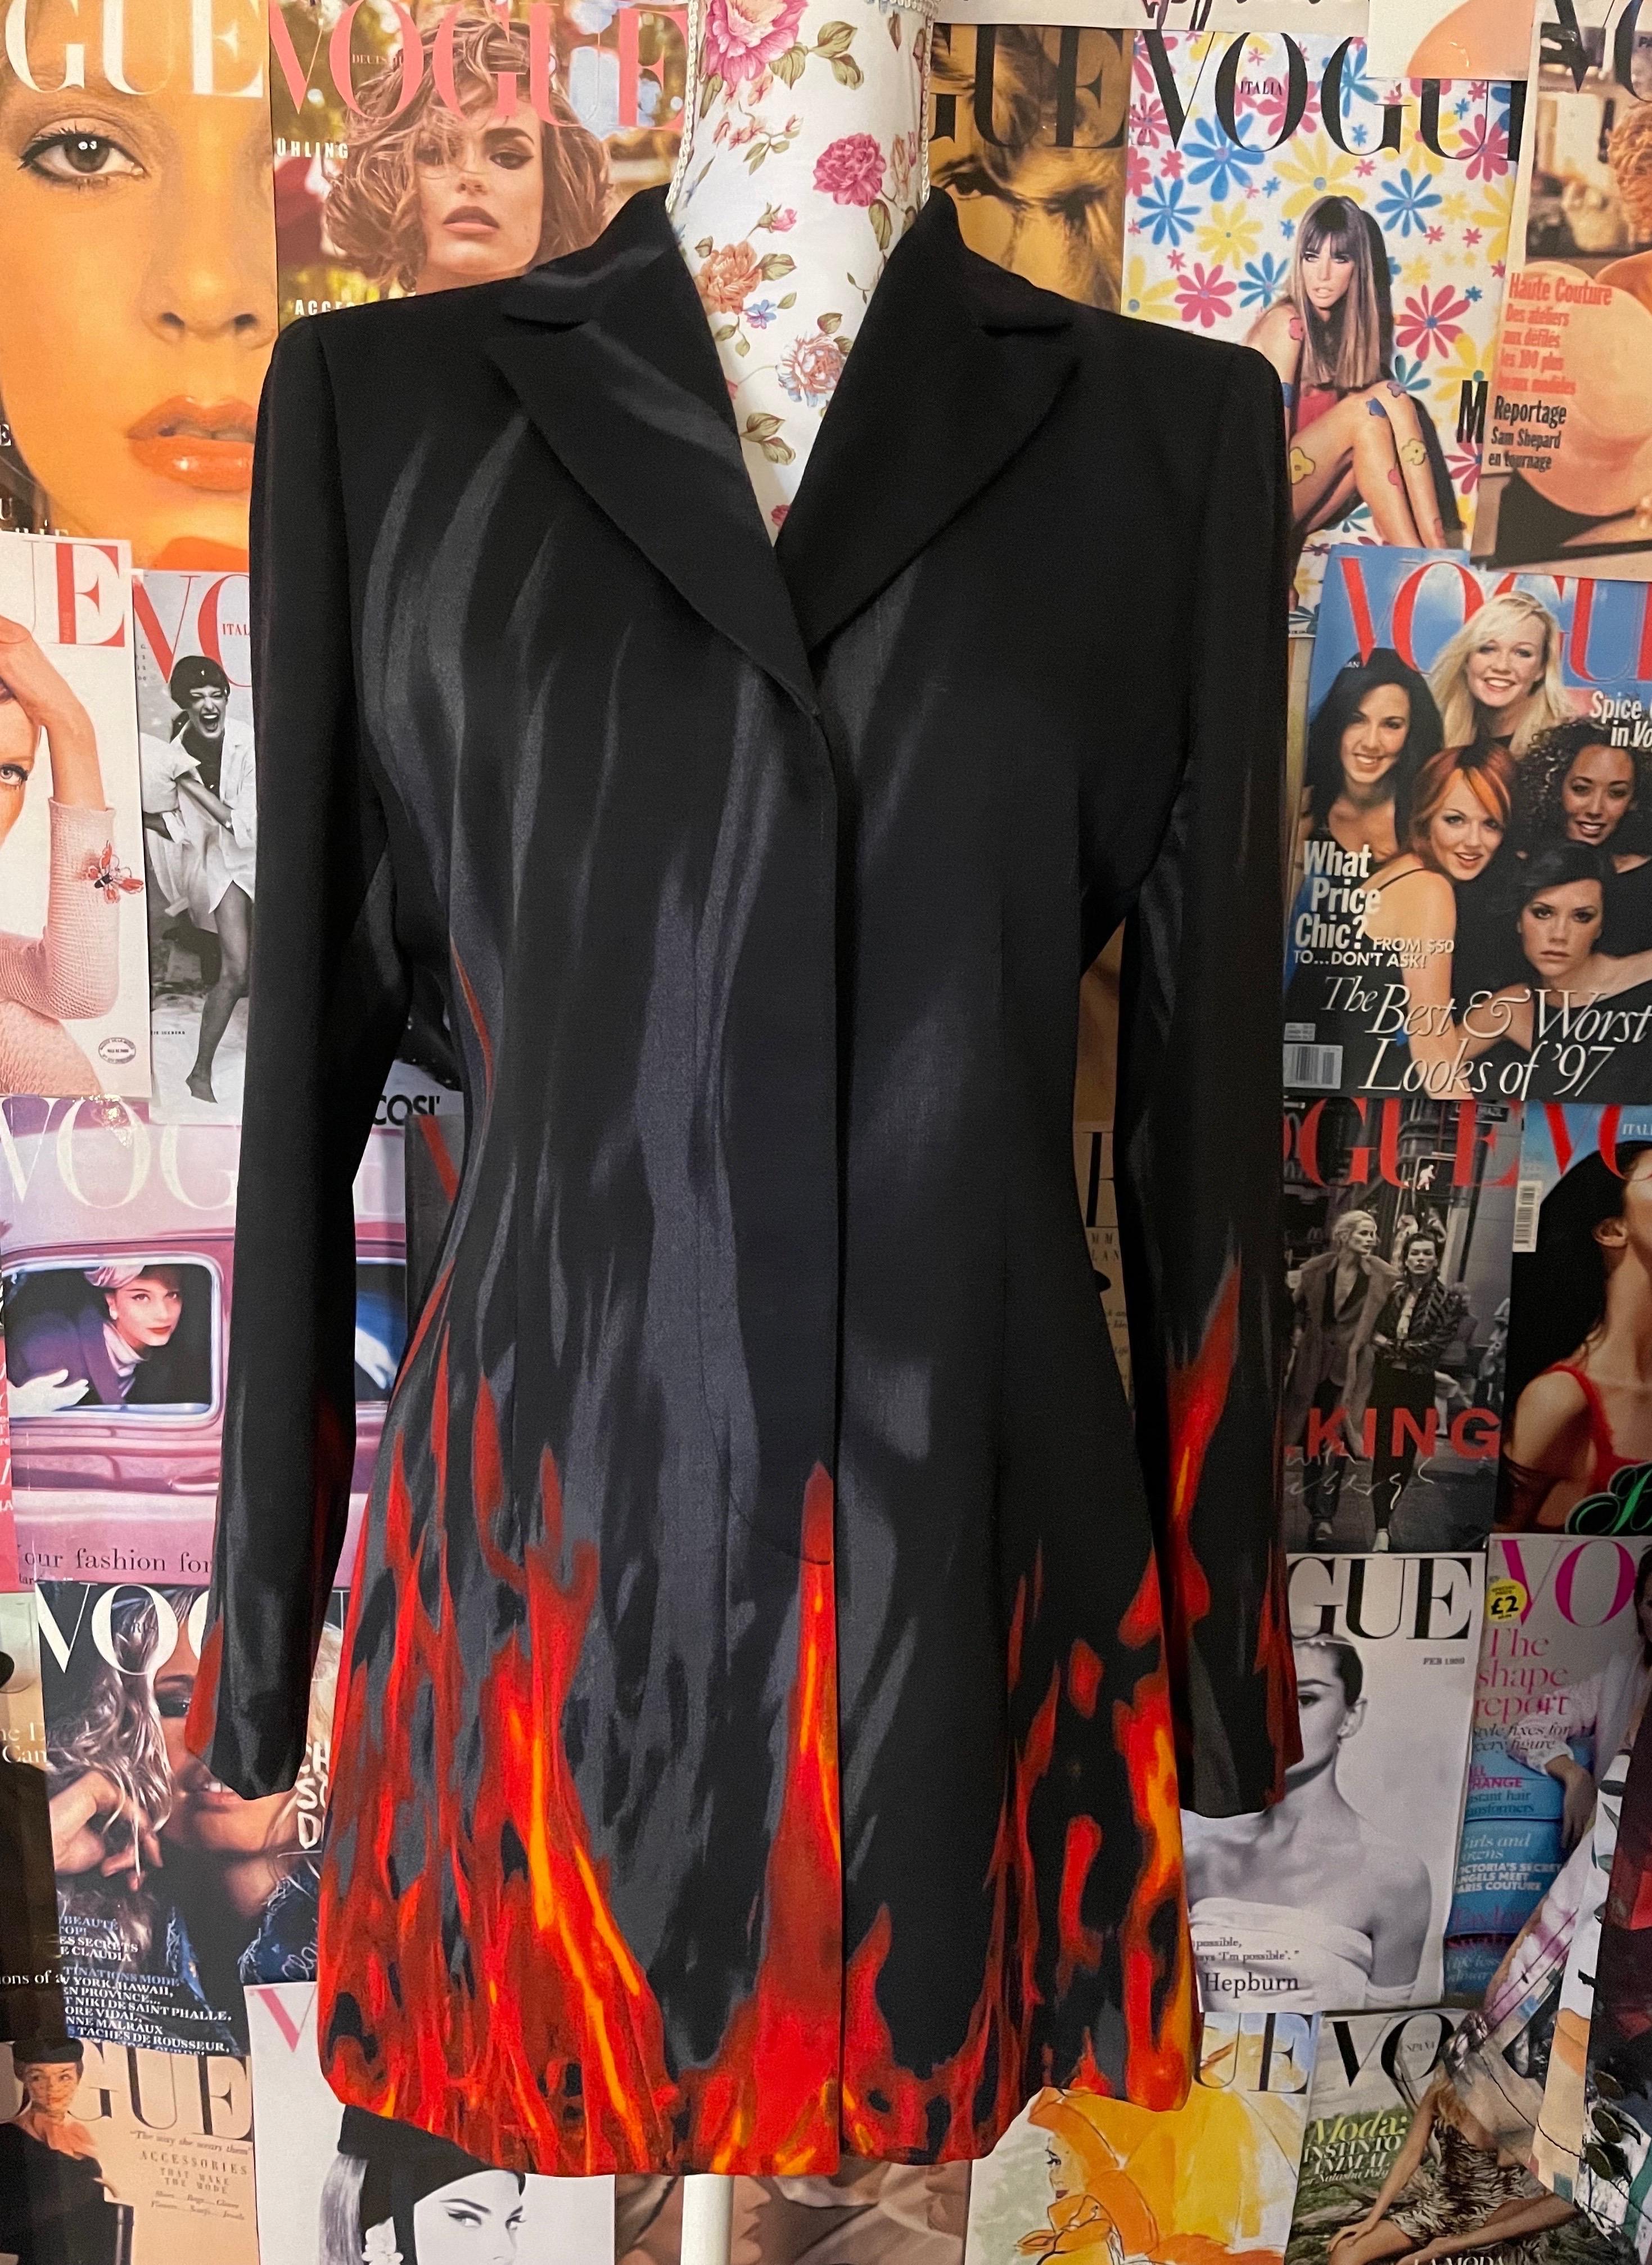 1990s Vintage flames print blazer by Italian designer Franco Moschino for Moschino Couture, it has been worn by Fran Drescher on the Nanny sitcomI
The blazer is in Perfect condition unfortunately I don't have the matching pants
It is marked as 38 